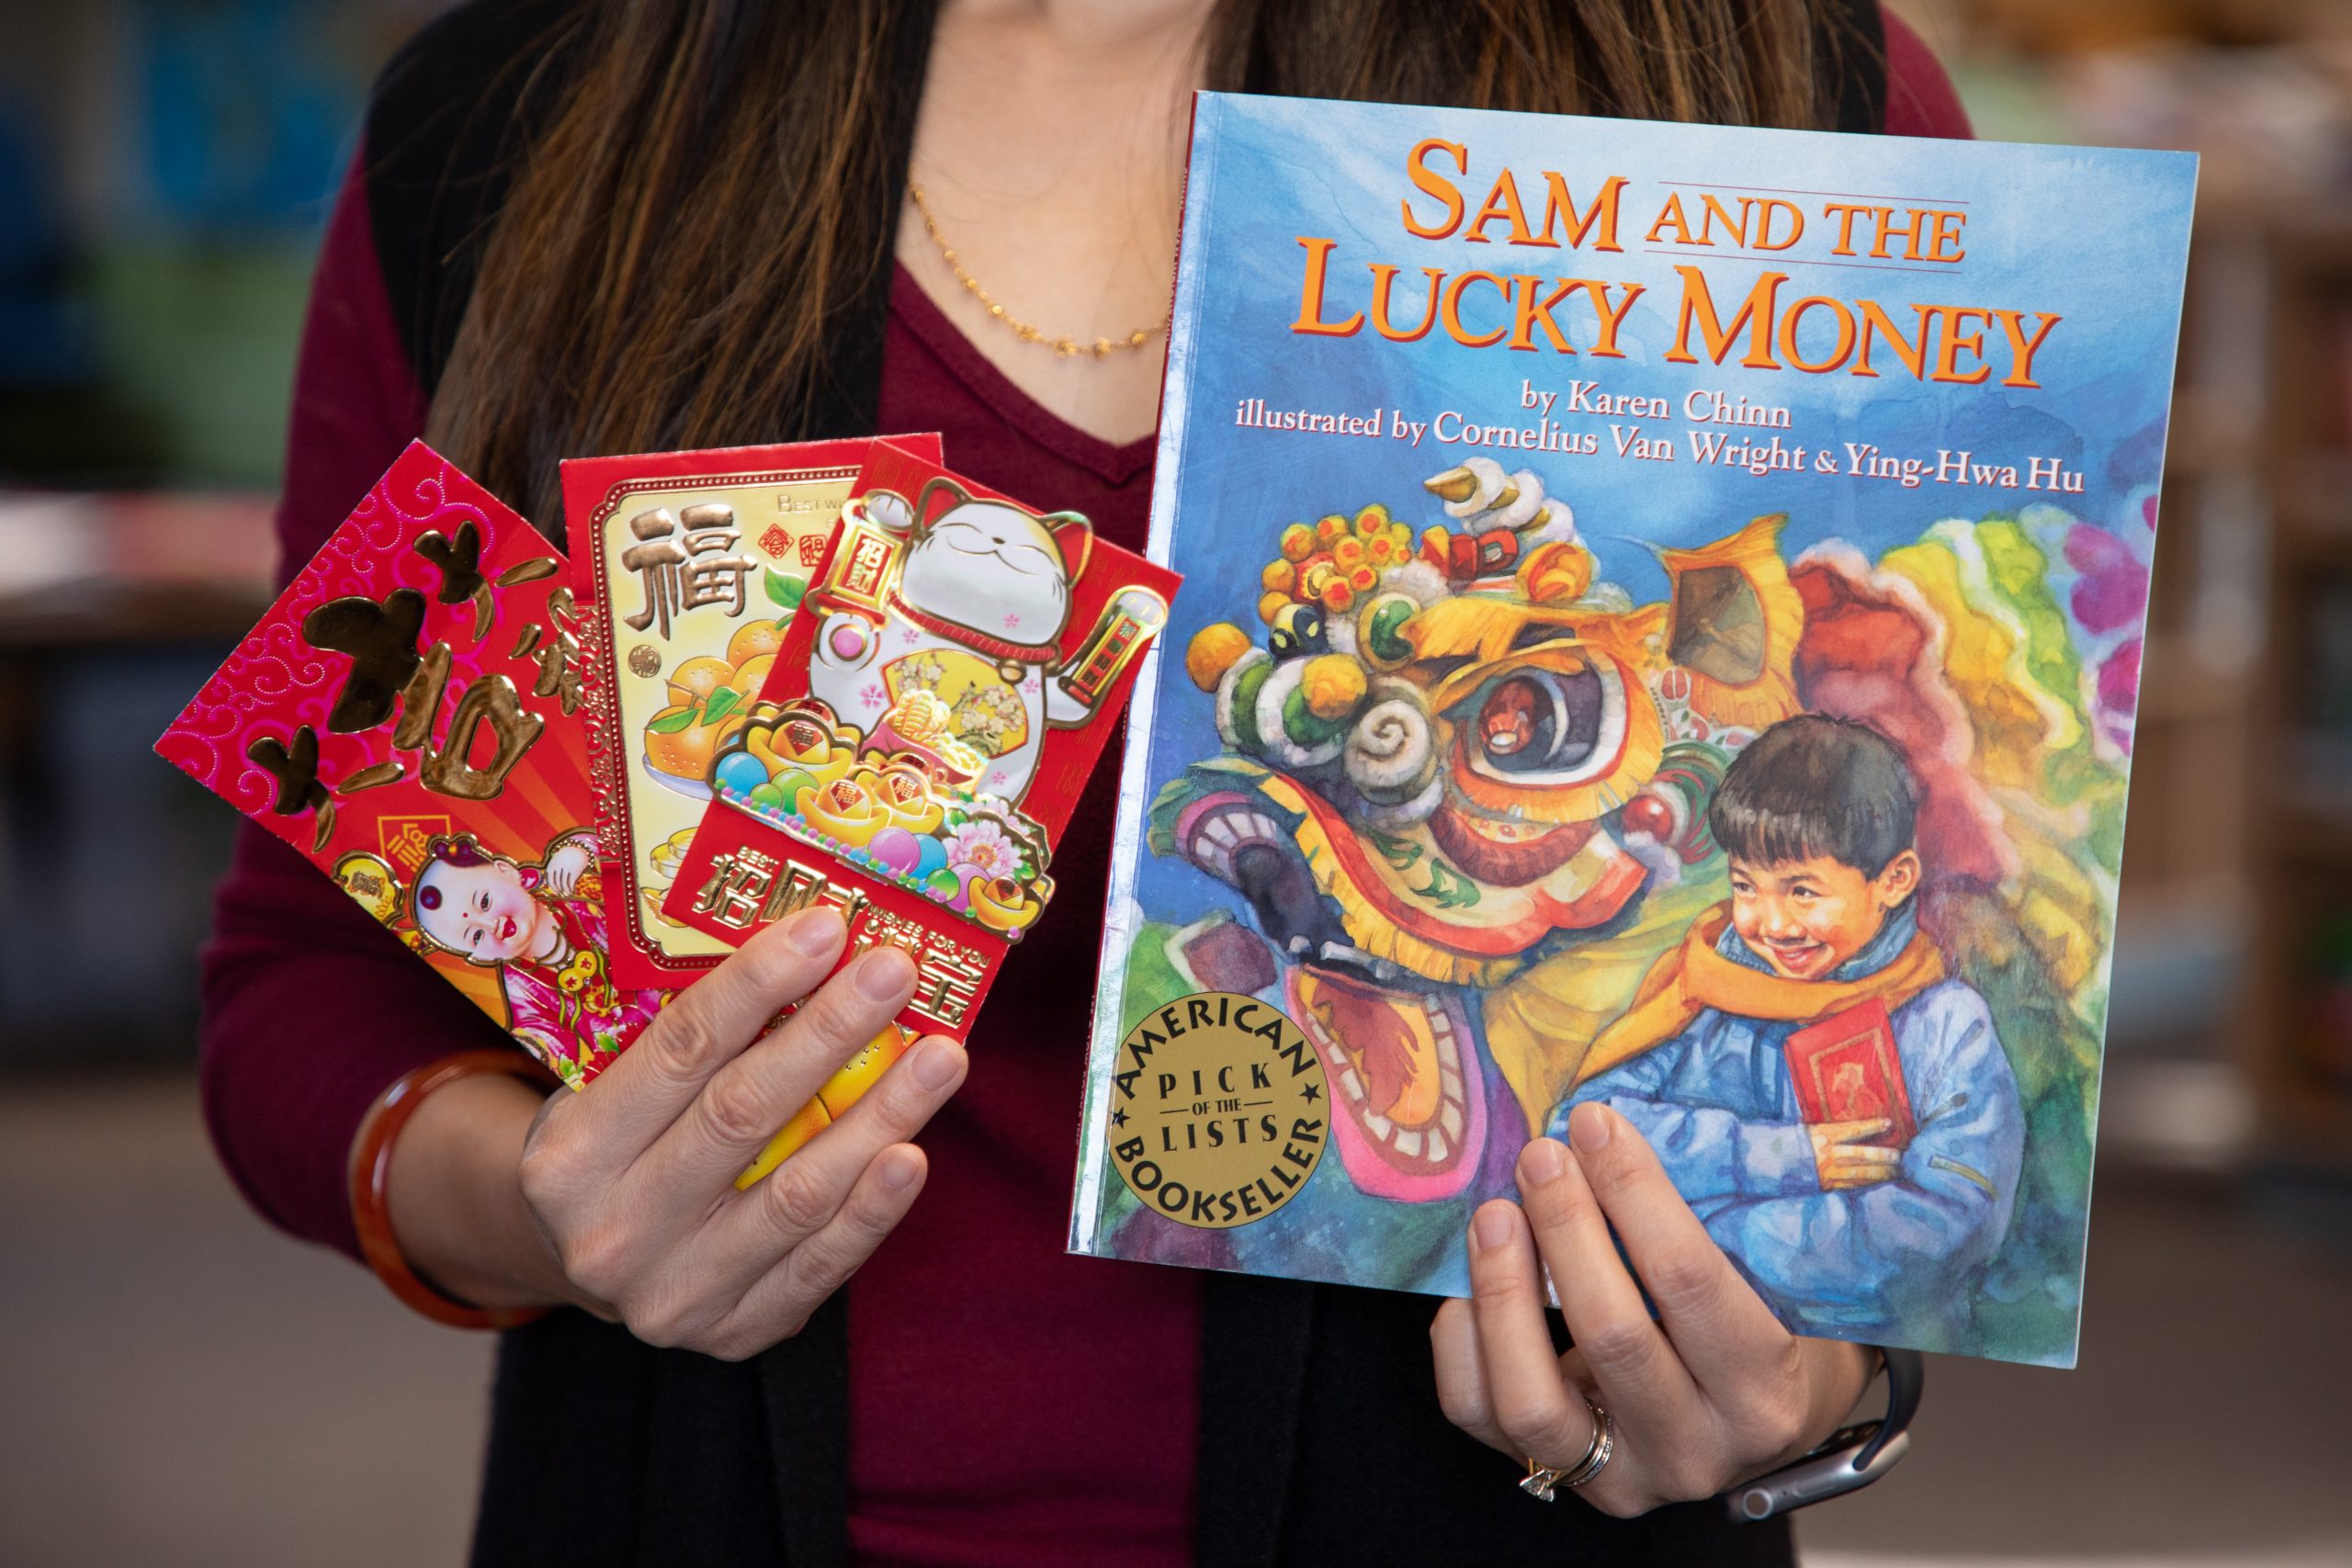 Cover of the book "Sam and the Lucky Money" by Karen Chinn along with three red envelopes for Lunar New Year.